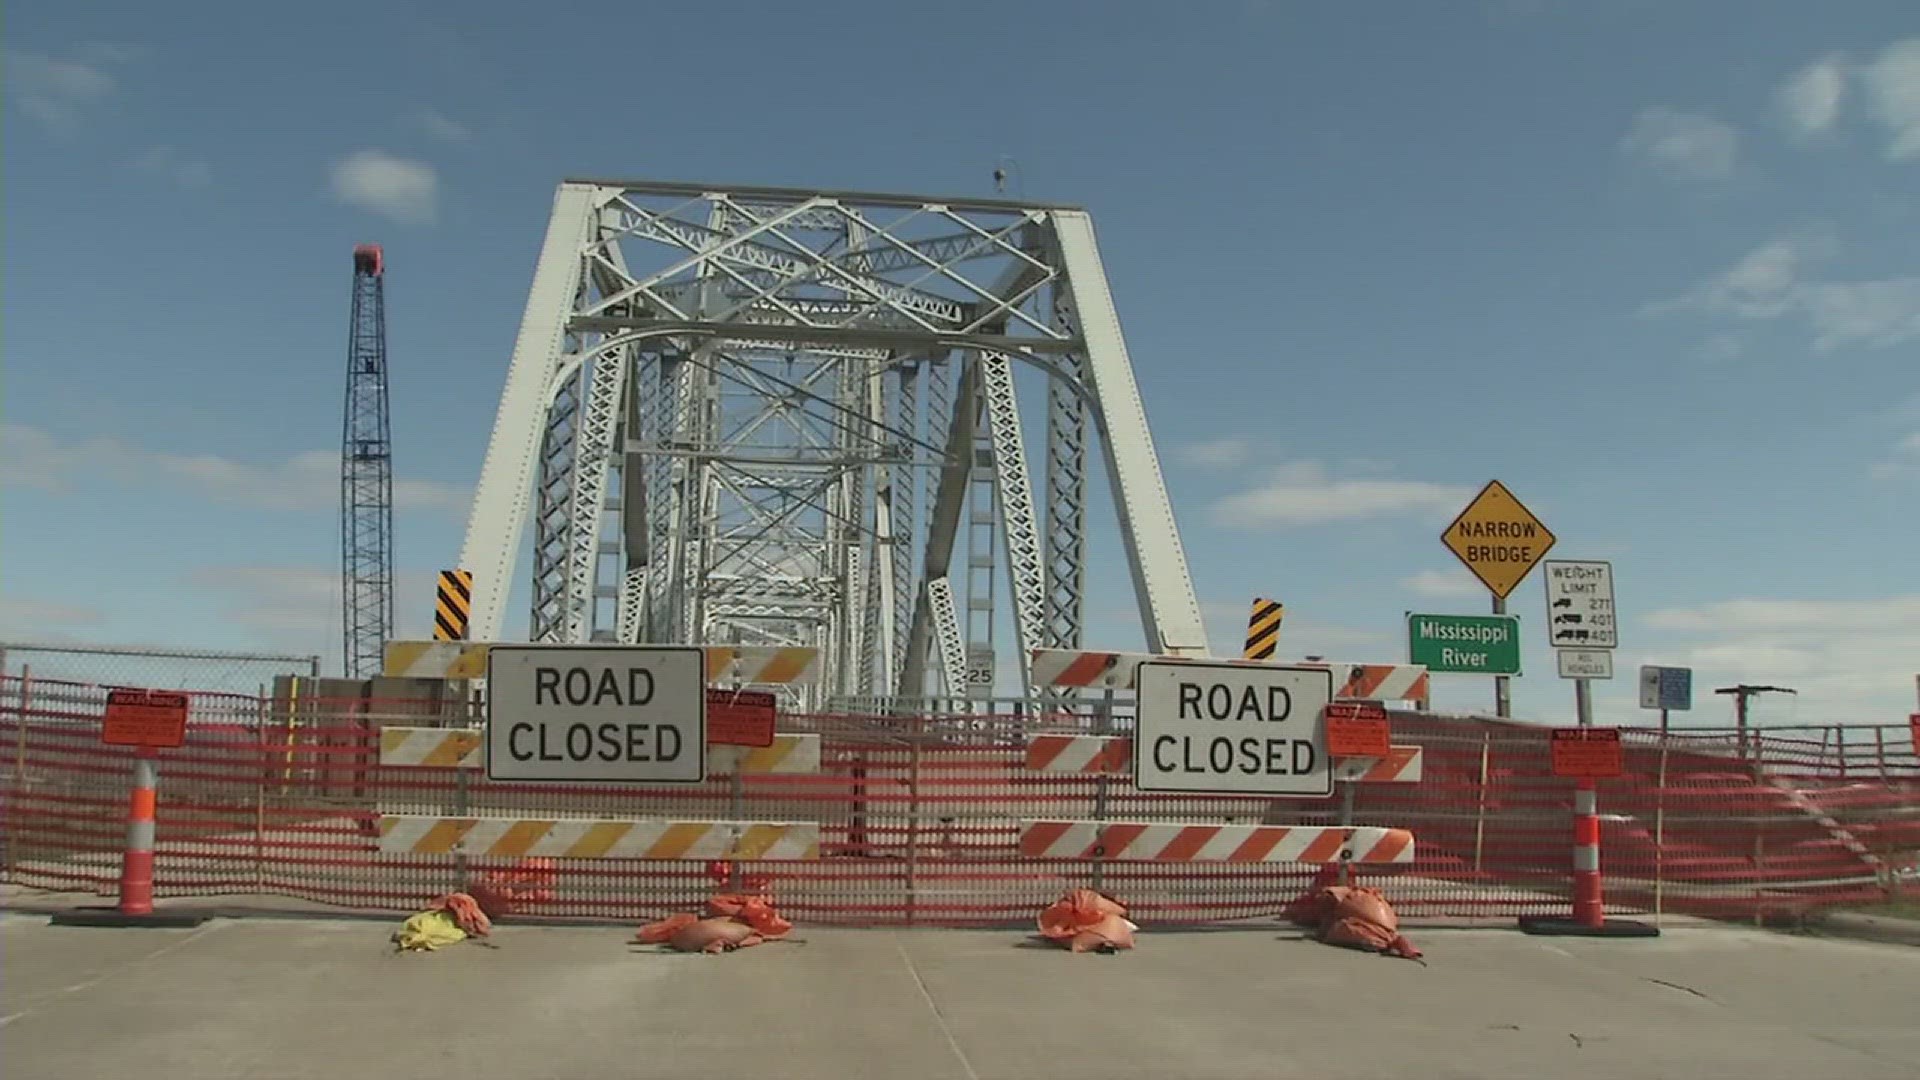 In today's headlines, the Black Hawk Bridge has re-opened, Arrowhead Rance has set date for last auto auction, and the pedal pub in Davenport is re-opening today.